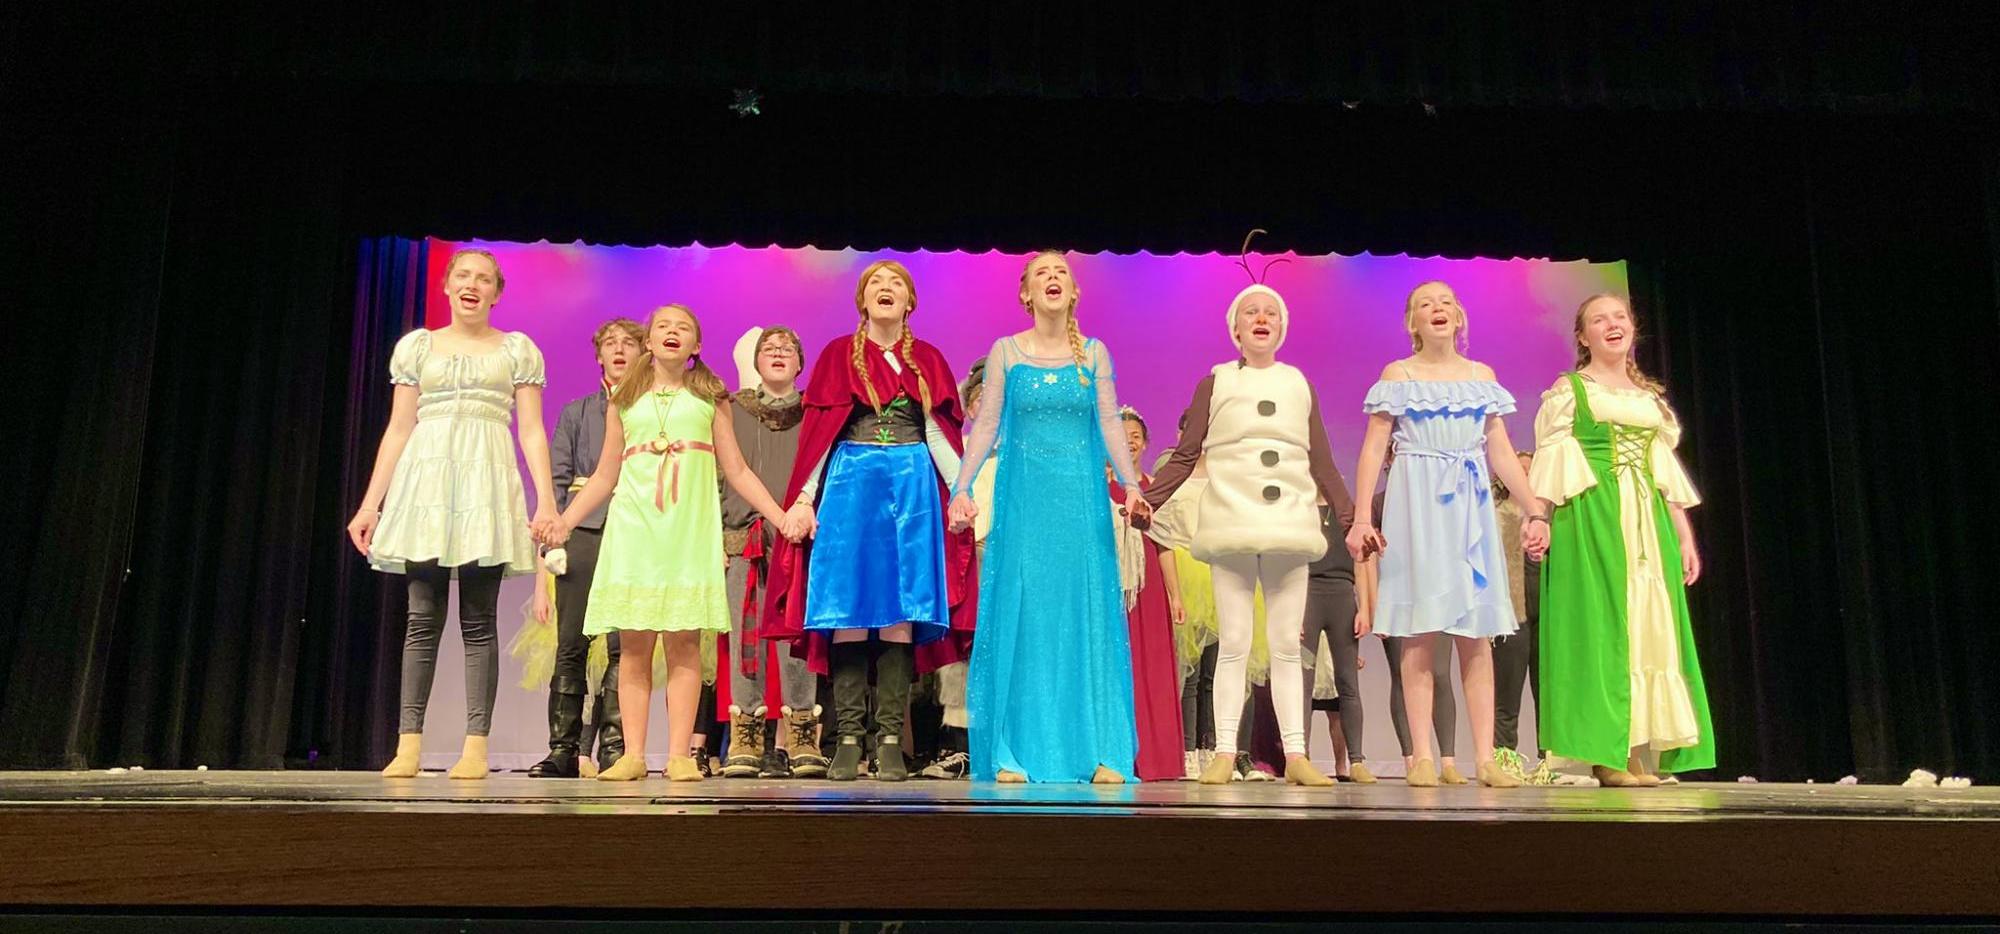 Frozen Jr. Musical on stage